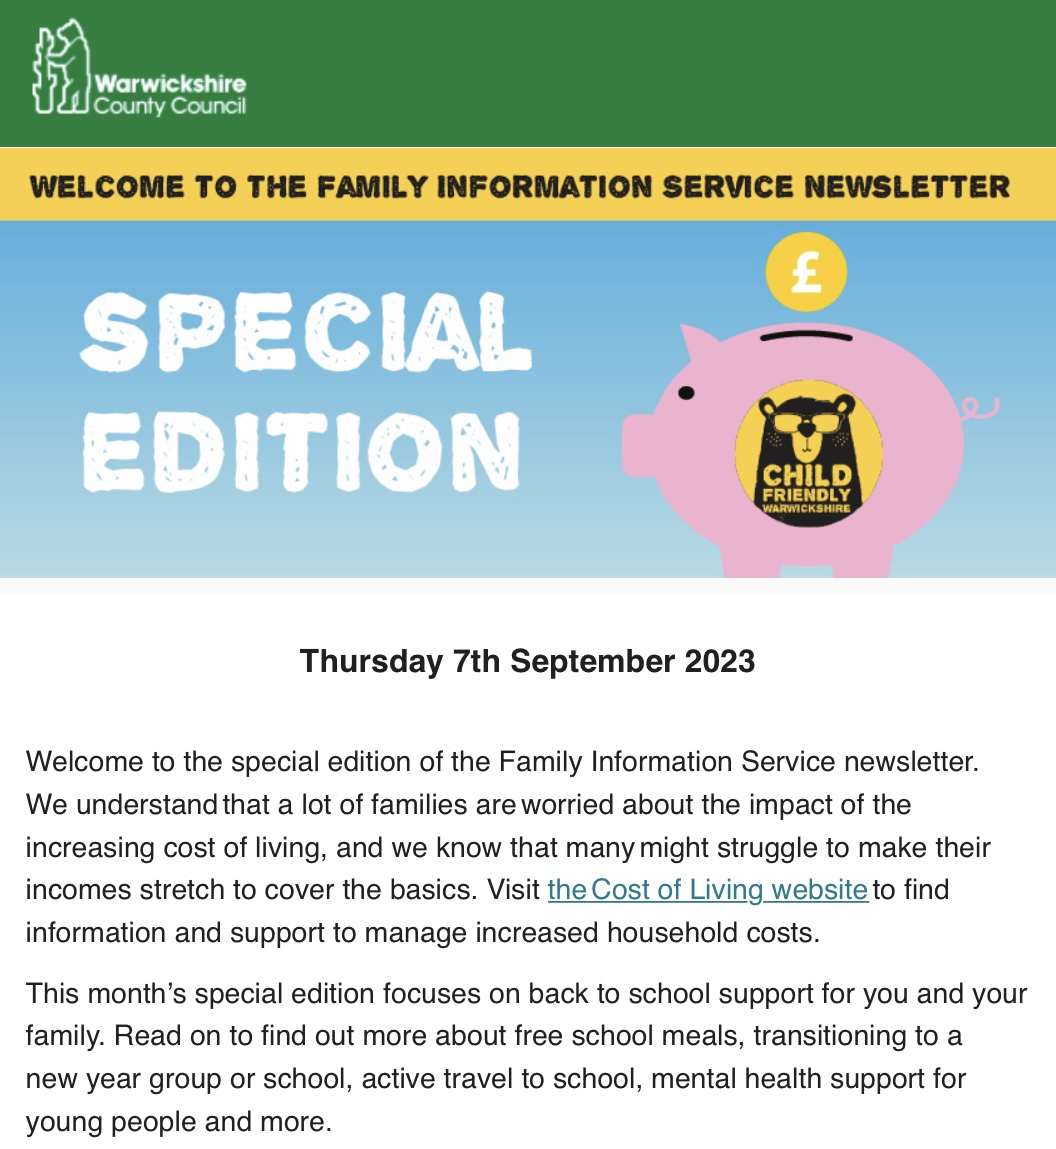 Family Information Service (FIS) Newsletter - Back to School Support Special Edition